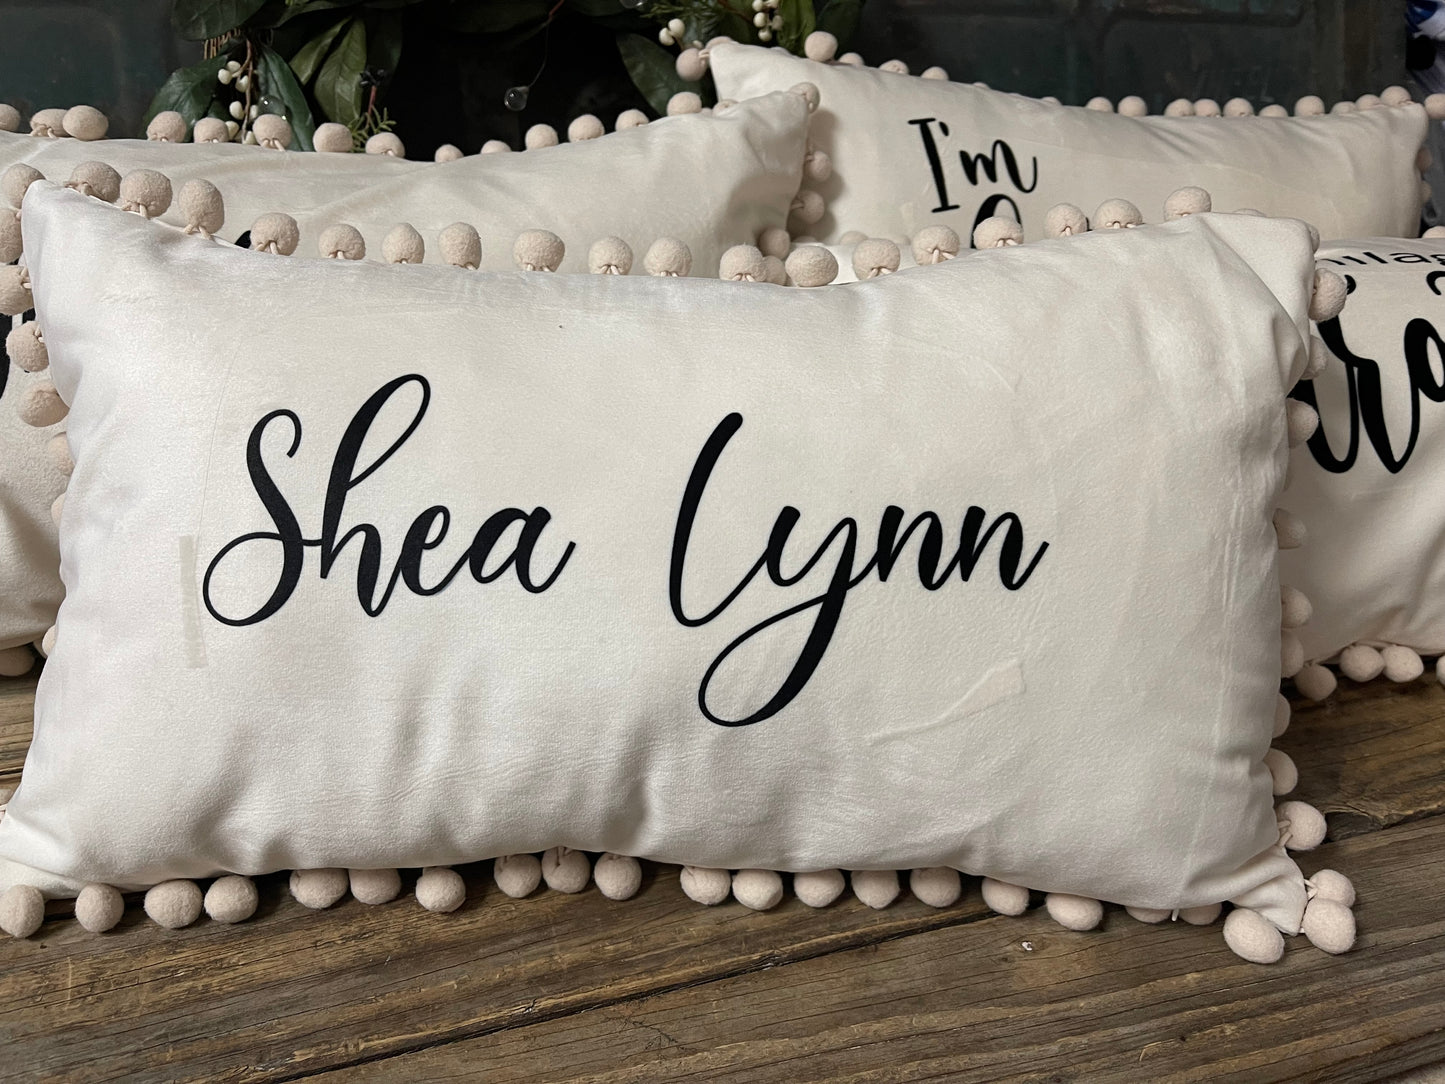 Personalized pillow, farmhouse style pillow with words